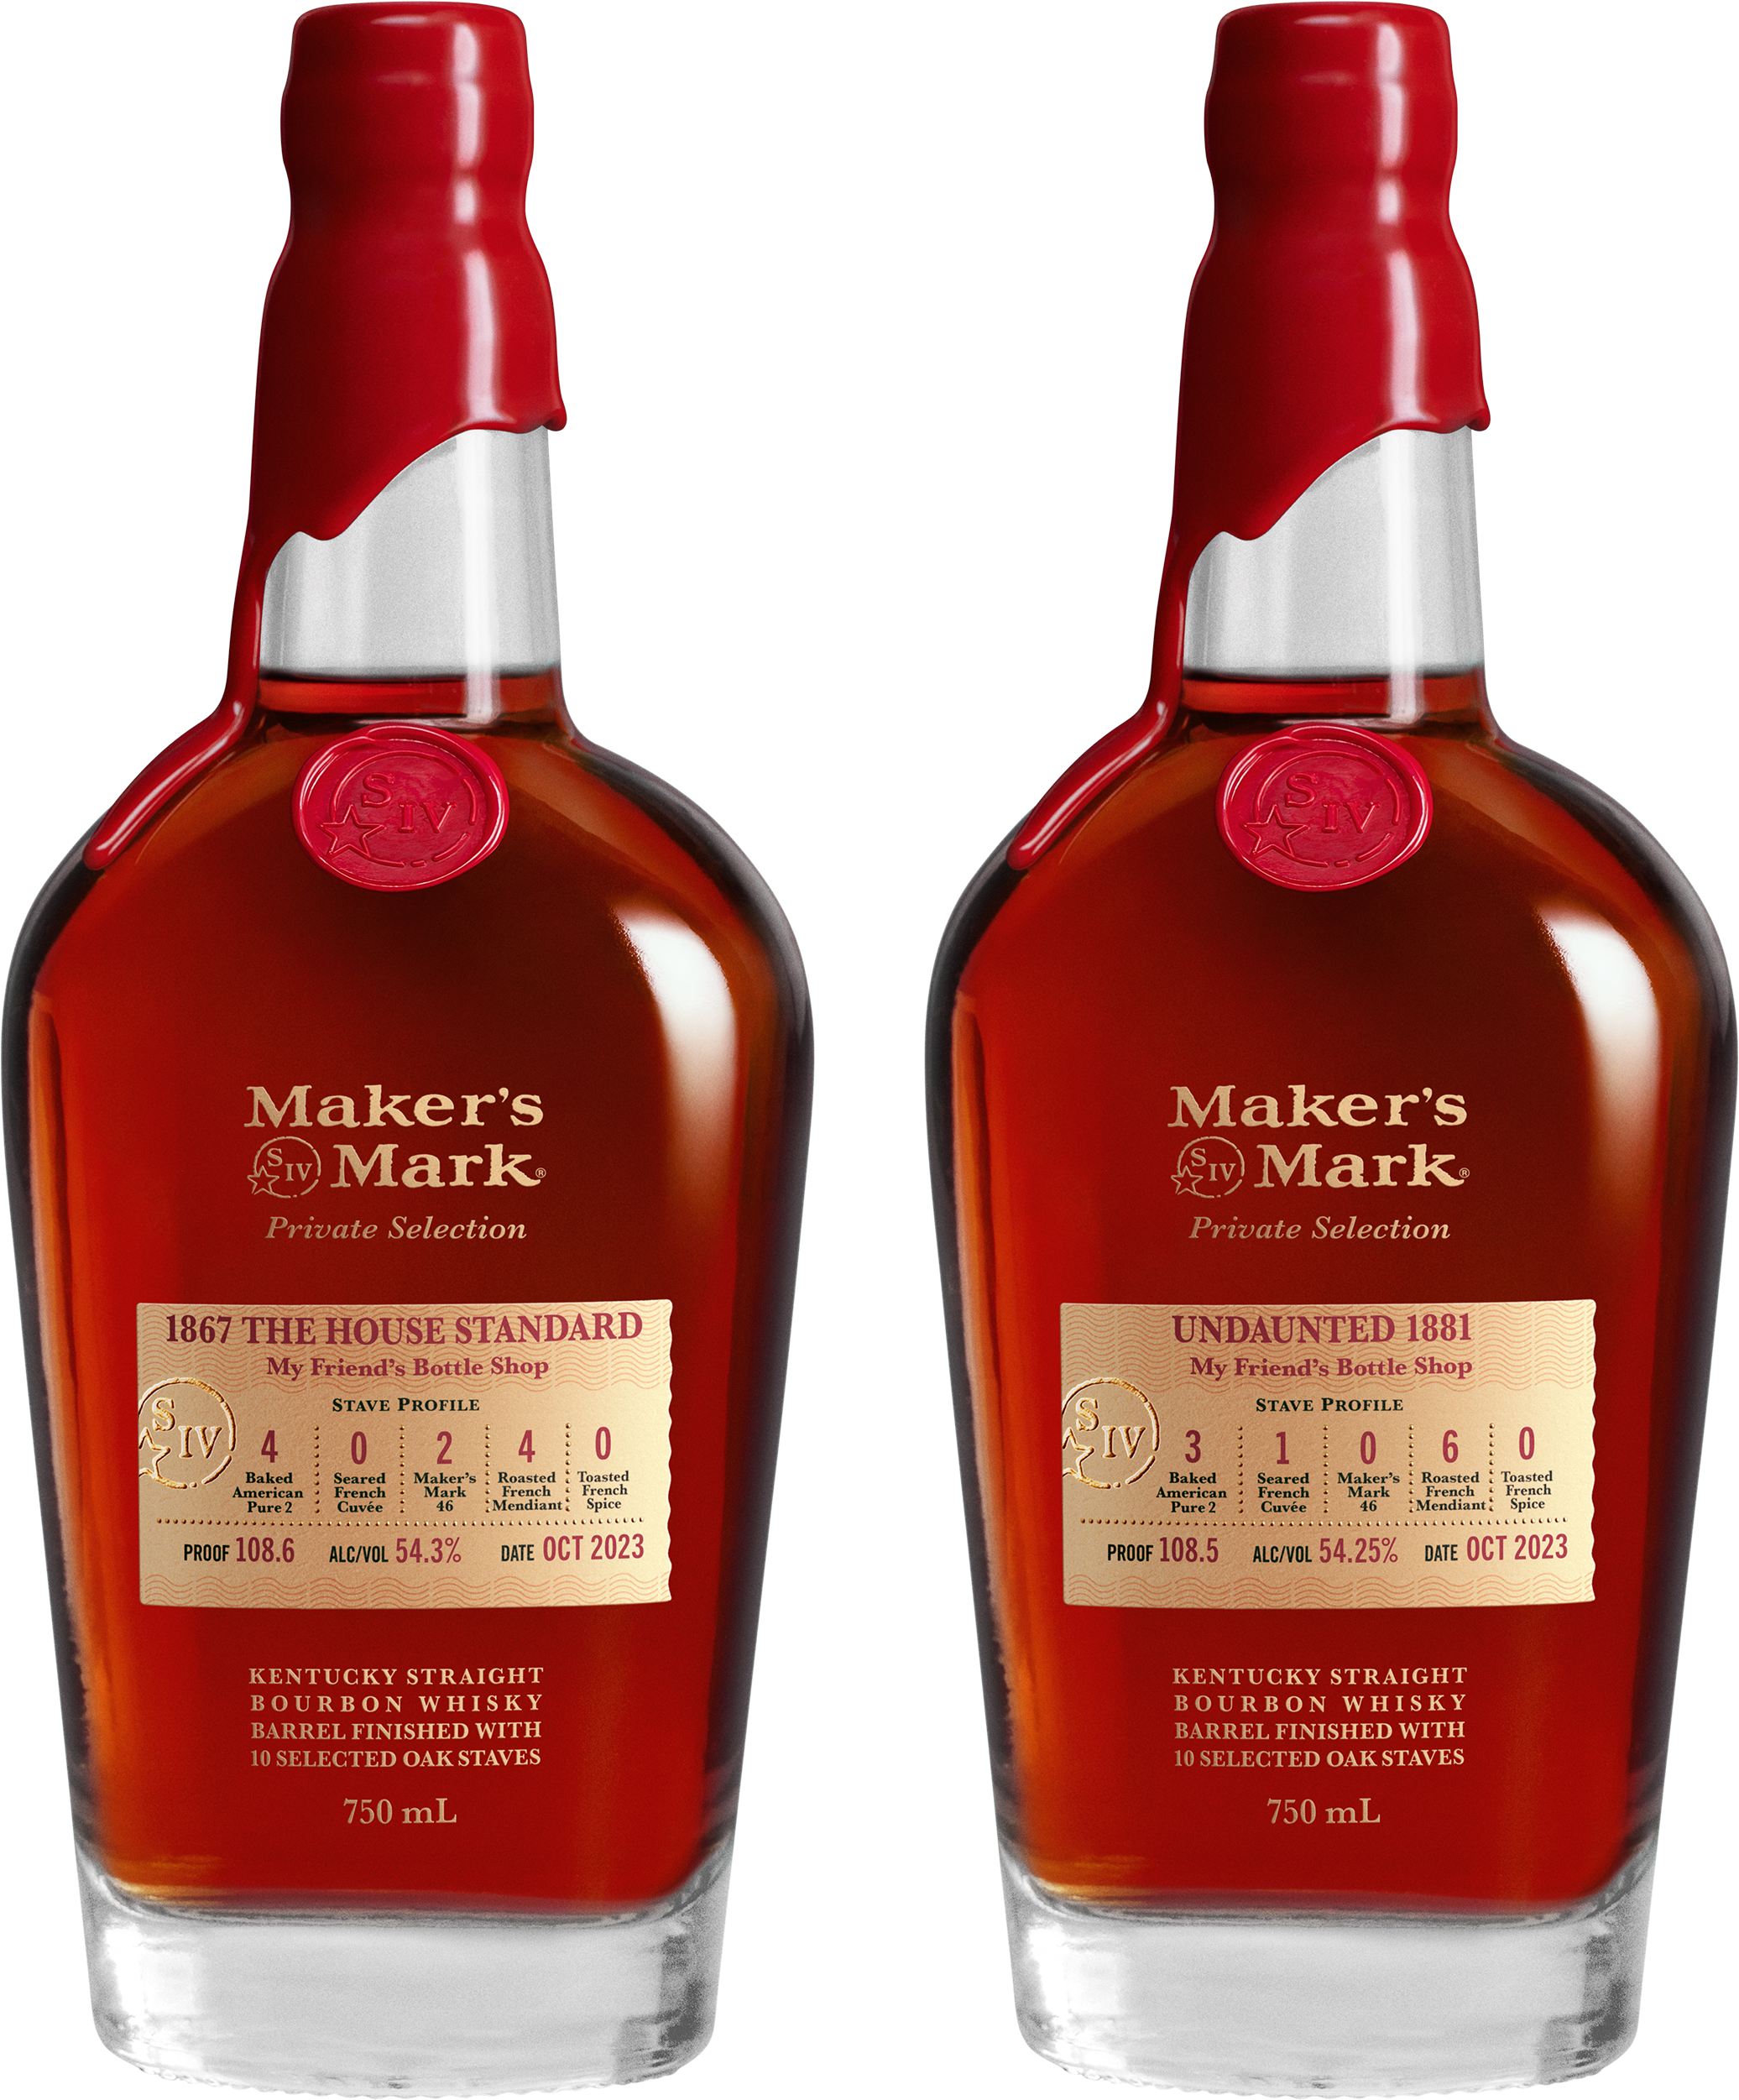 HBCU Alumni Partner With Maker’s Mark To Create A Limited Bourbon To Honor Morehouse And Spelman 